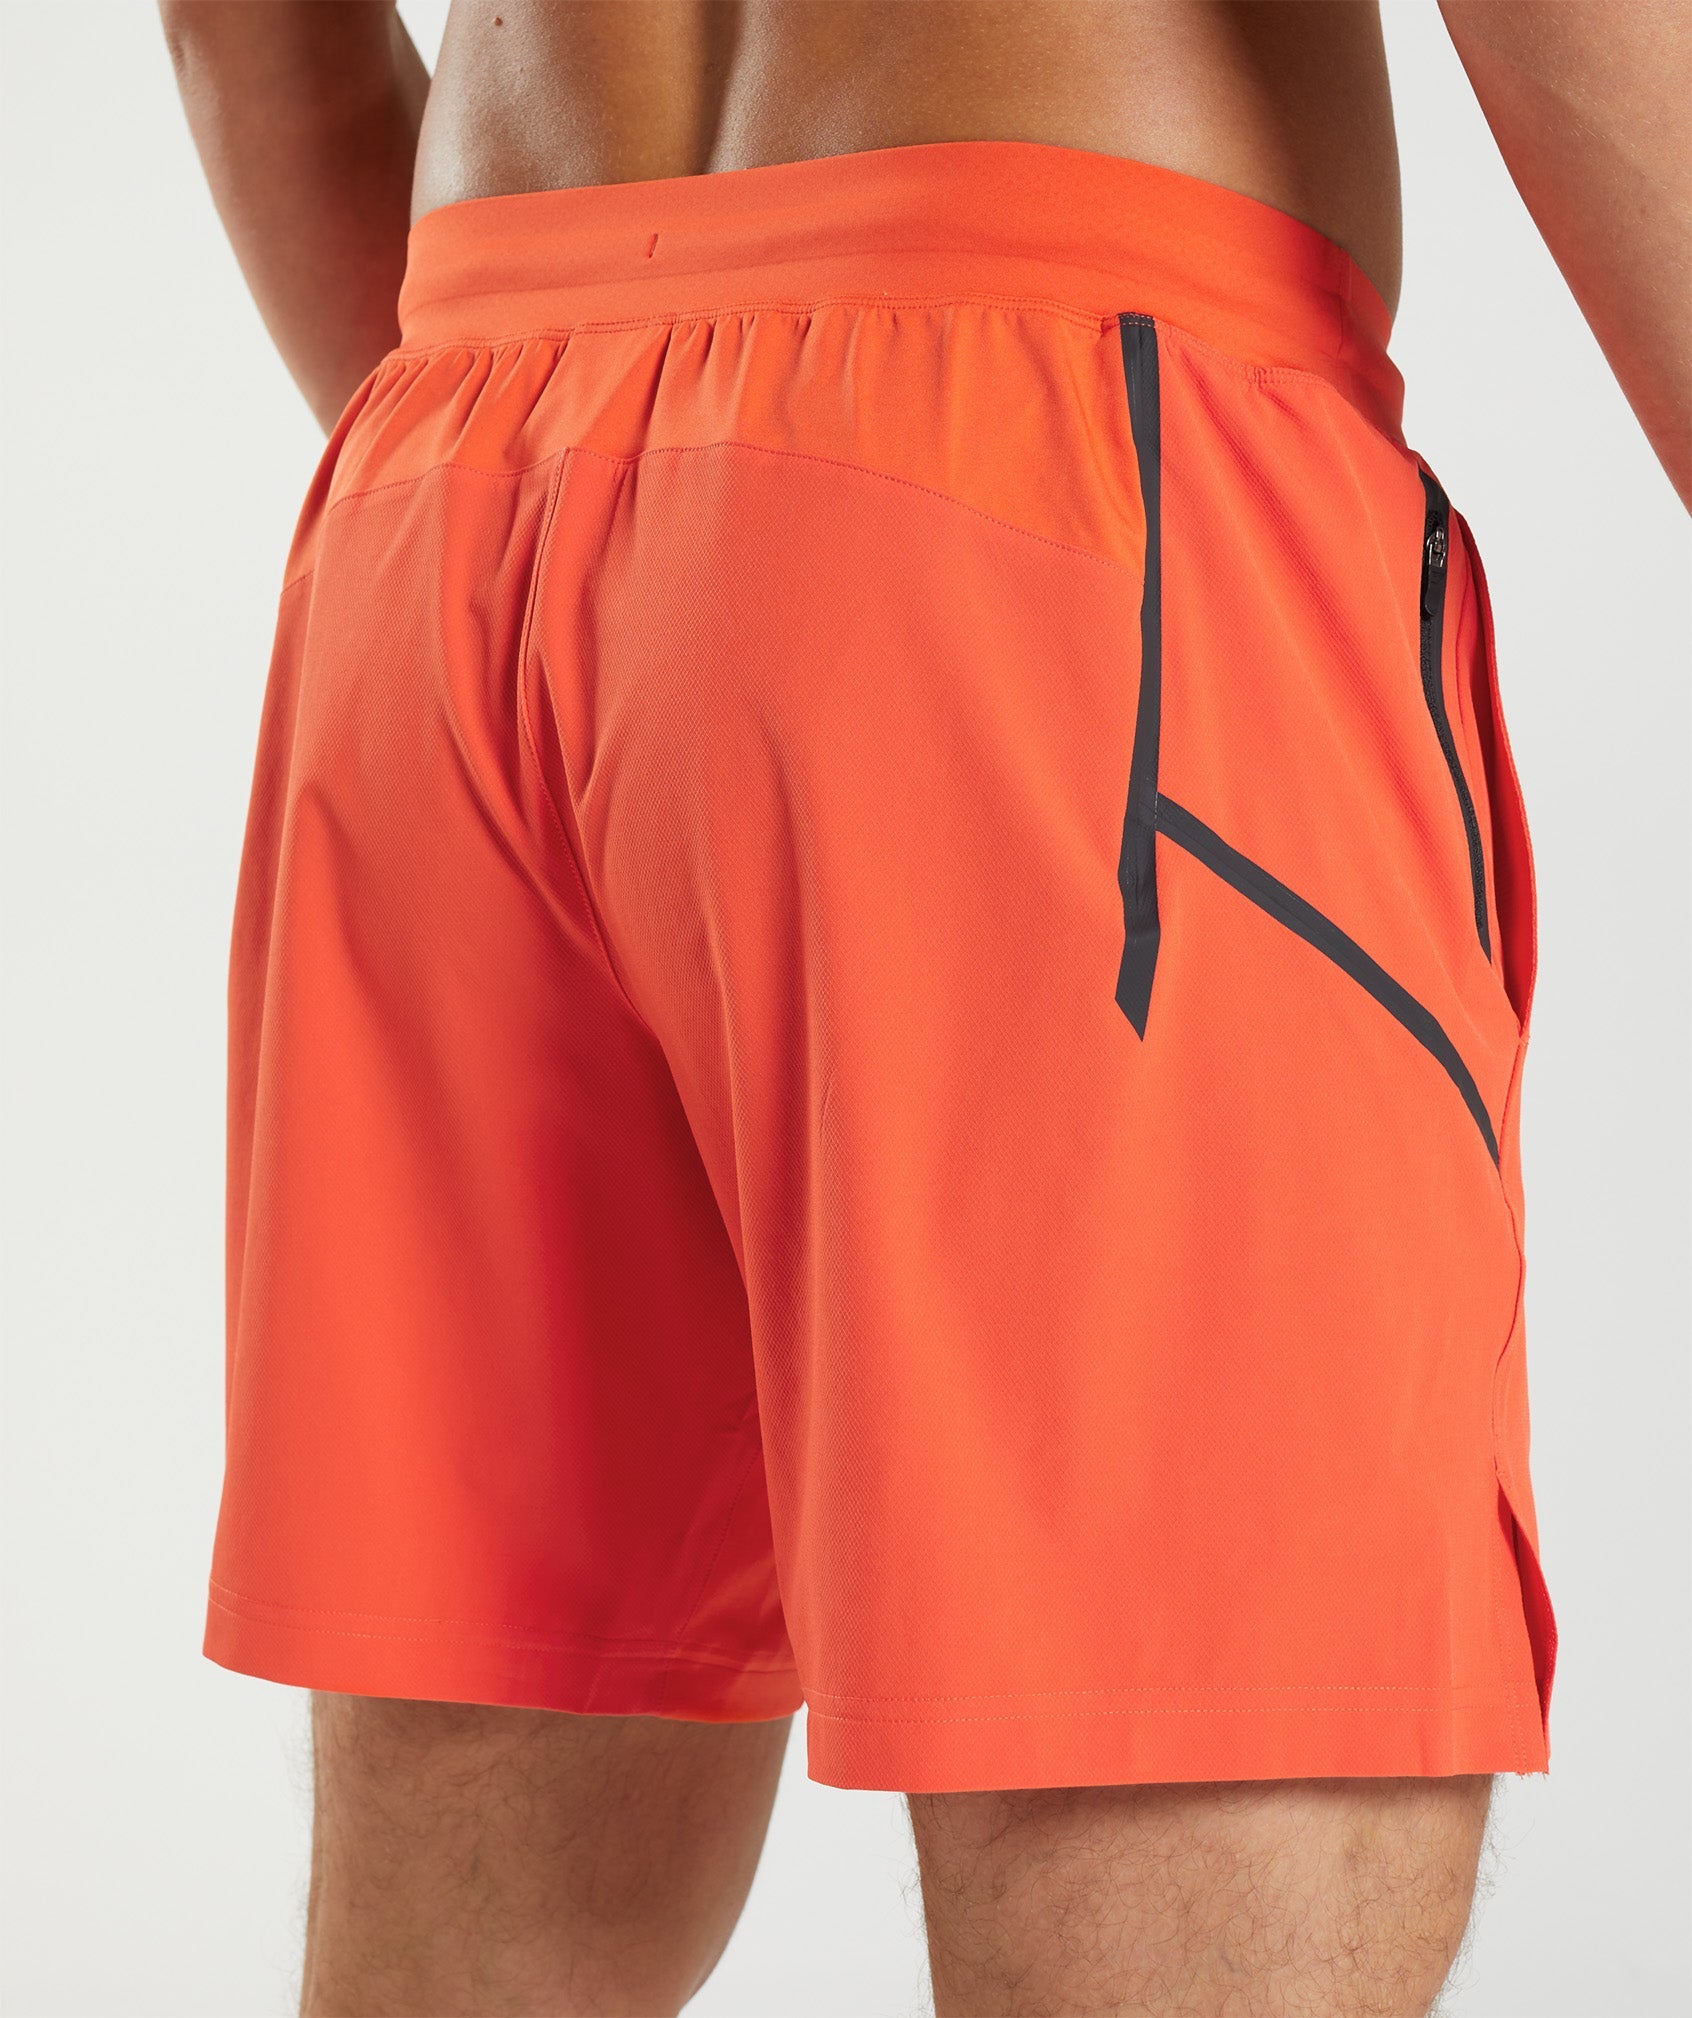 Apex 8" Function Shorts in Pepper Red - view 4